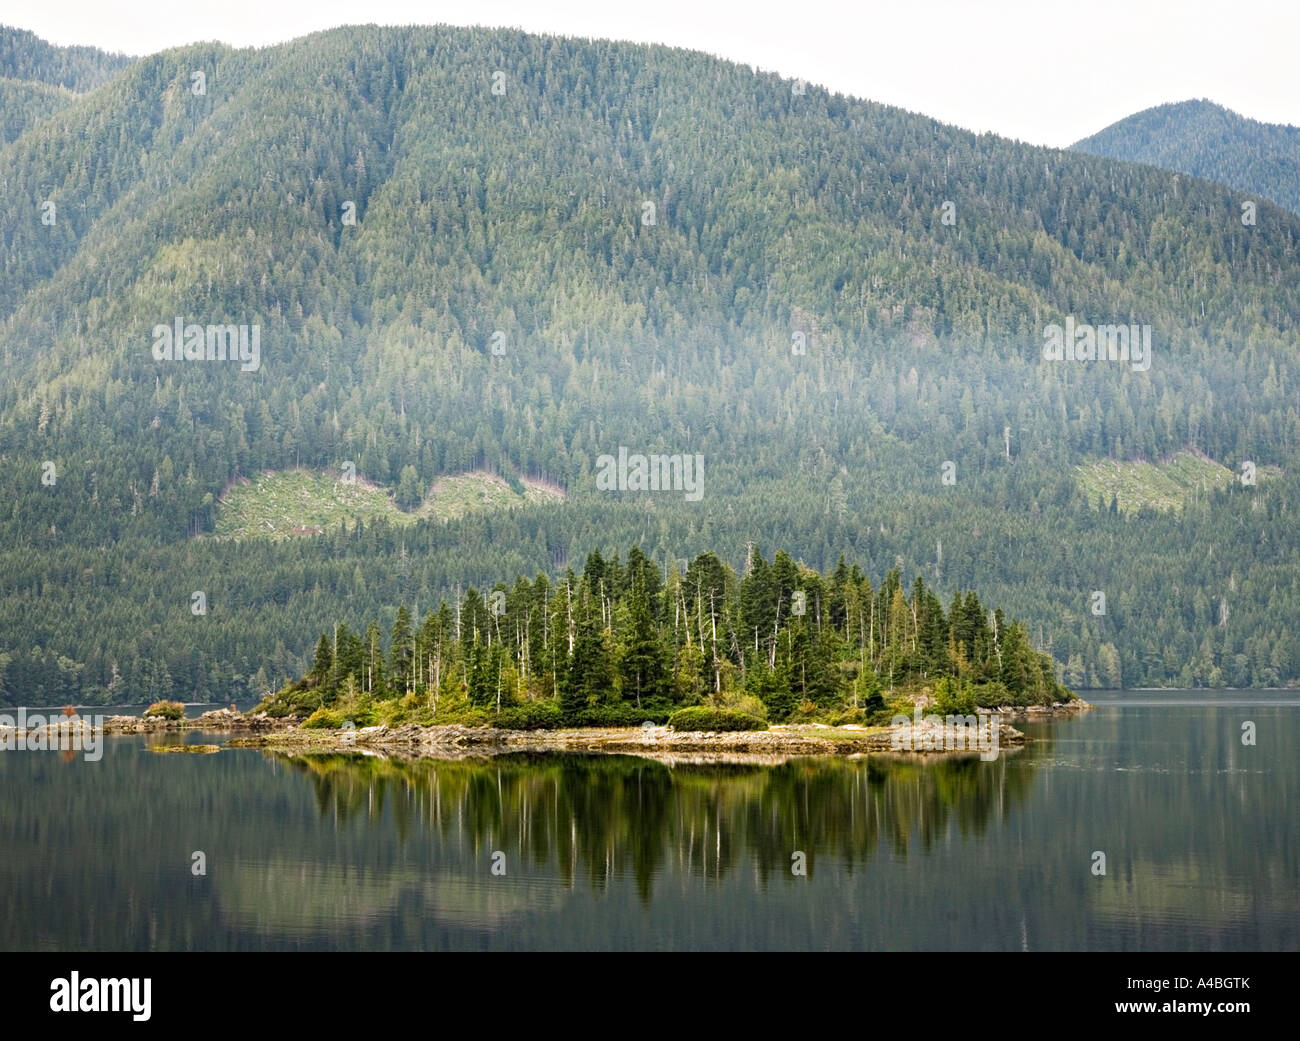 Misty scene in early morning at Port Alice on west coast Vancouver island Canada Stock Photo